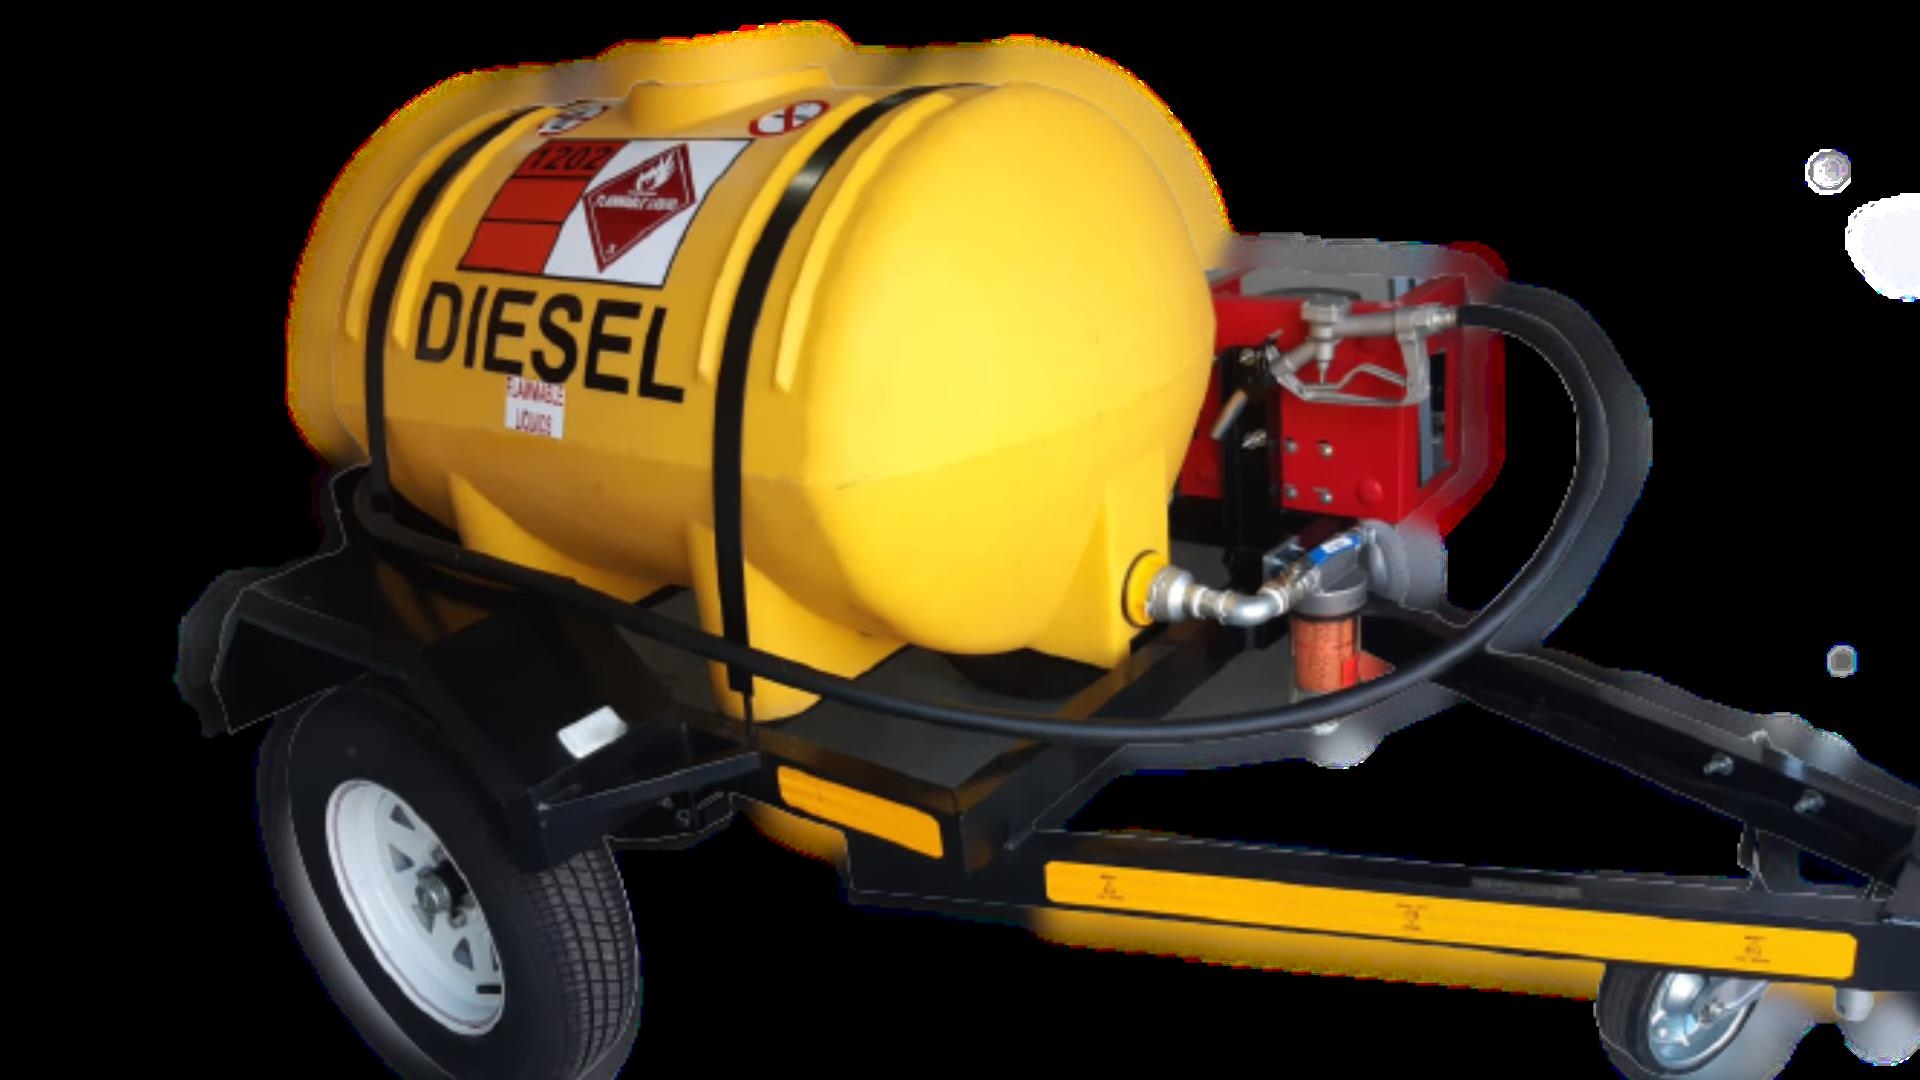 Custom Diesel bowser trailer 500 Litre Plastic Diesel Bowser KZN!!! 2021 for sale by Jikelele Tankers and Trailers   | Truck & Trailer Marketplaces